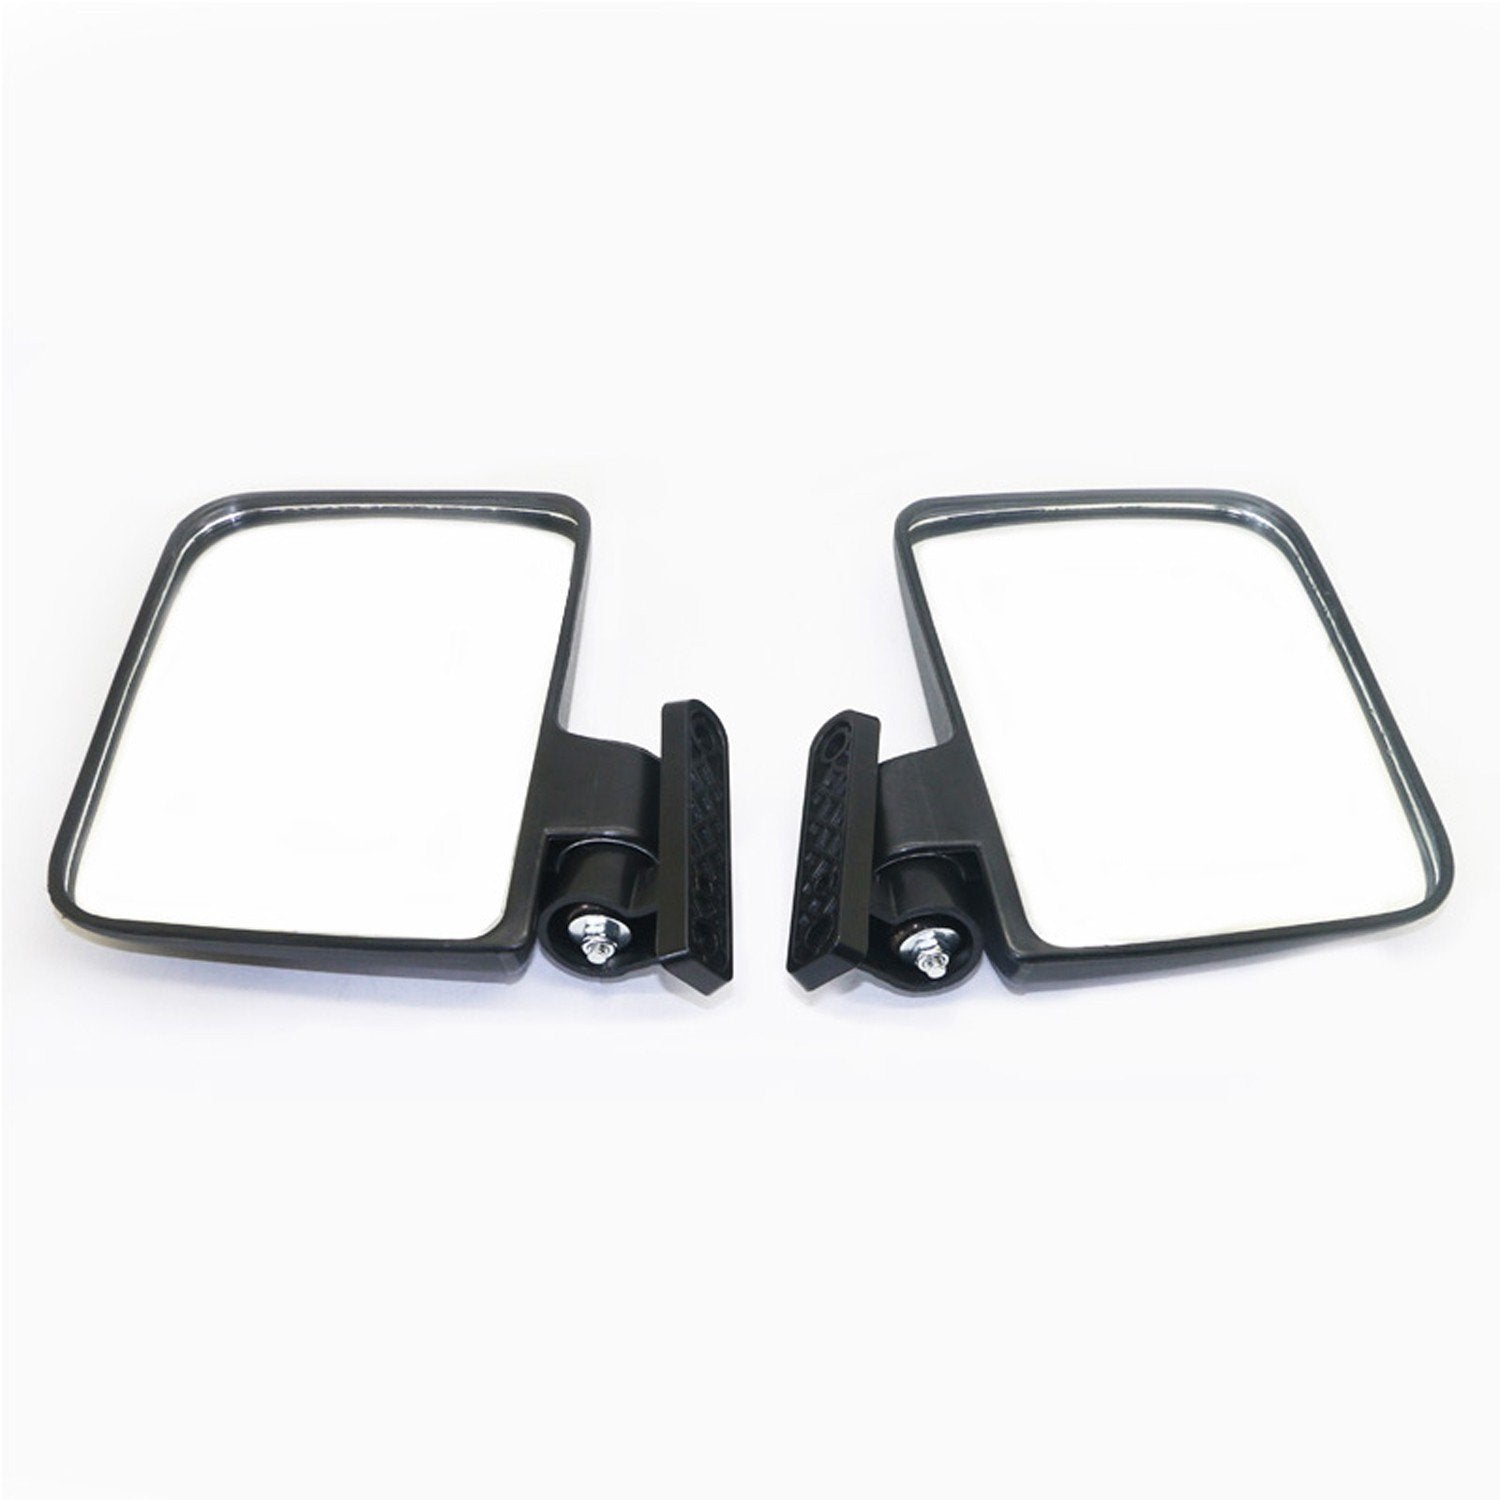 Cart Reversing Mirror Field Car Convex Side Rearview For Carts Clubs